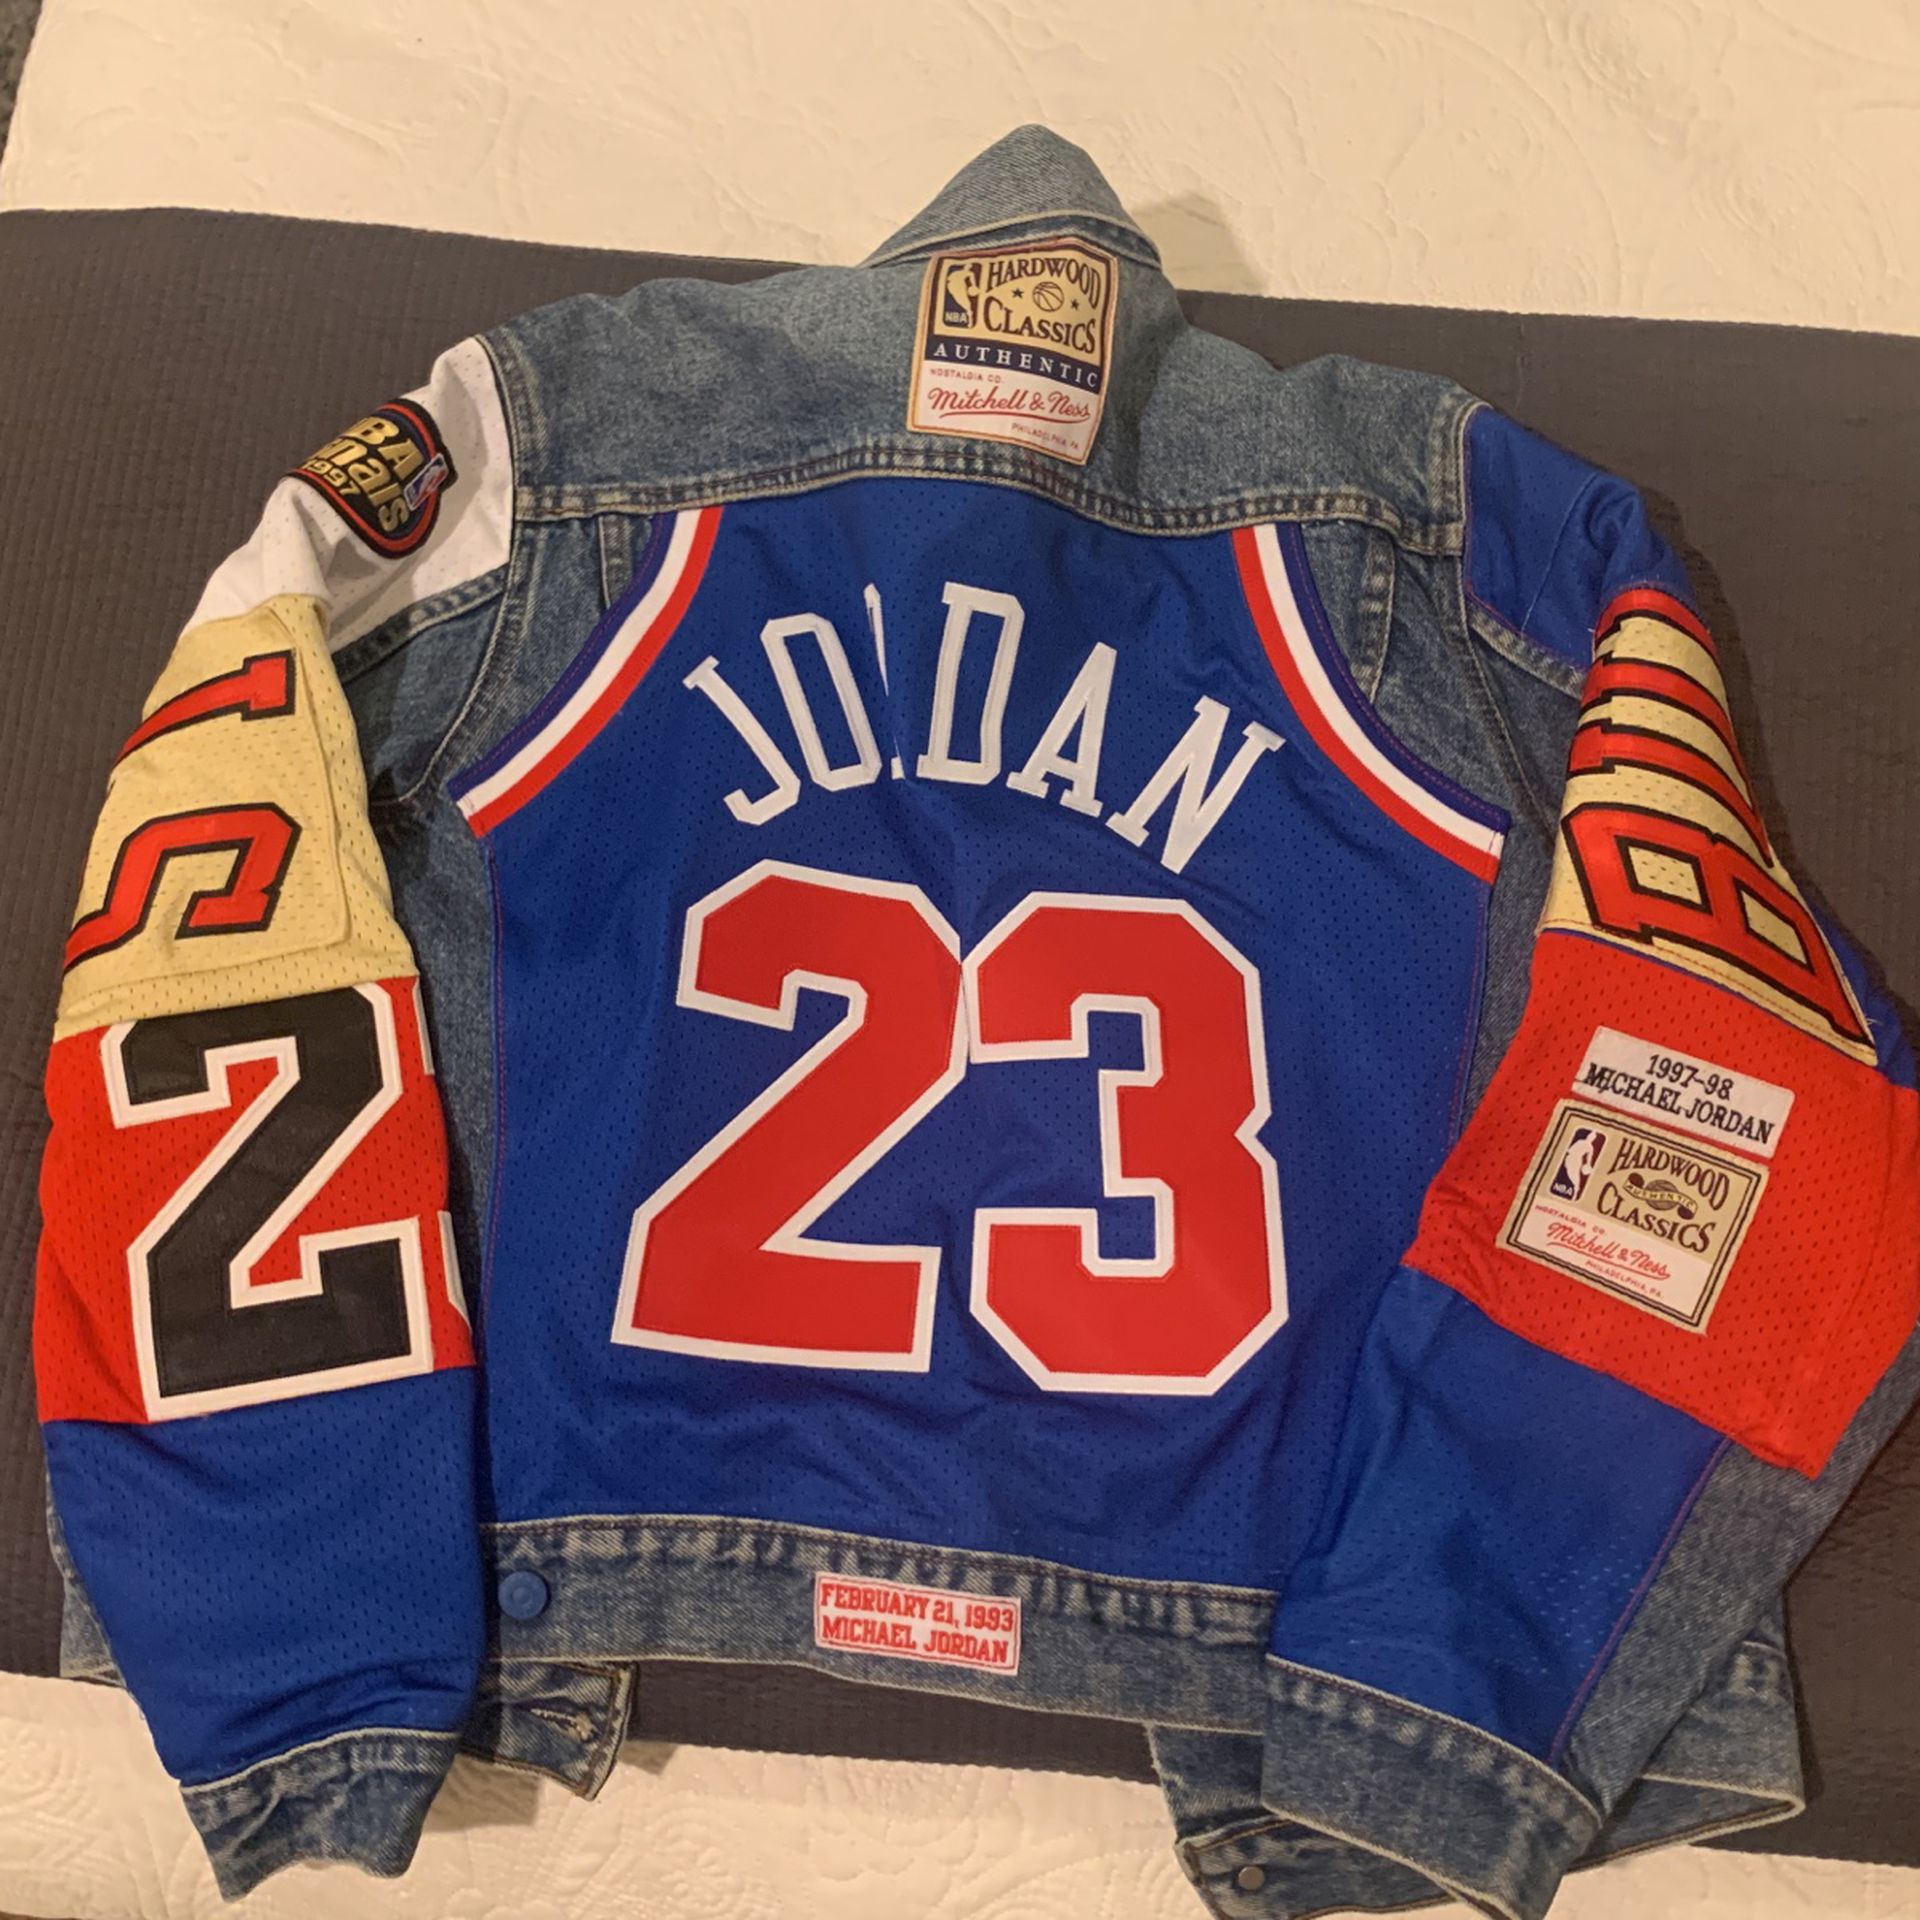 Levi NBA Chicago bulls Jean jacket for Sale in Mackinaw, IL - OfferUp